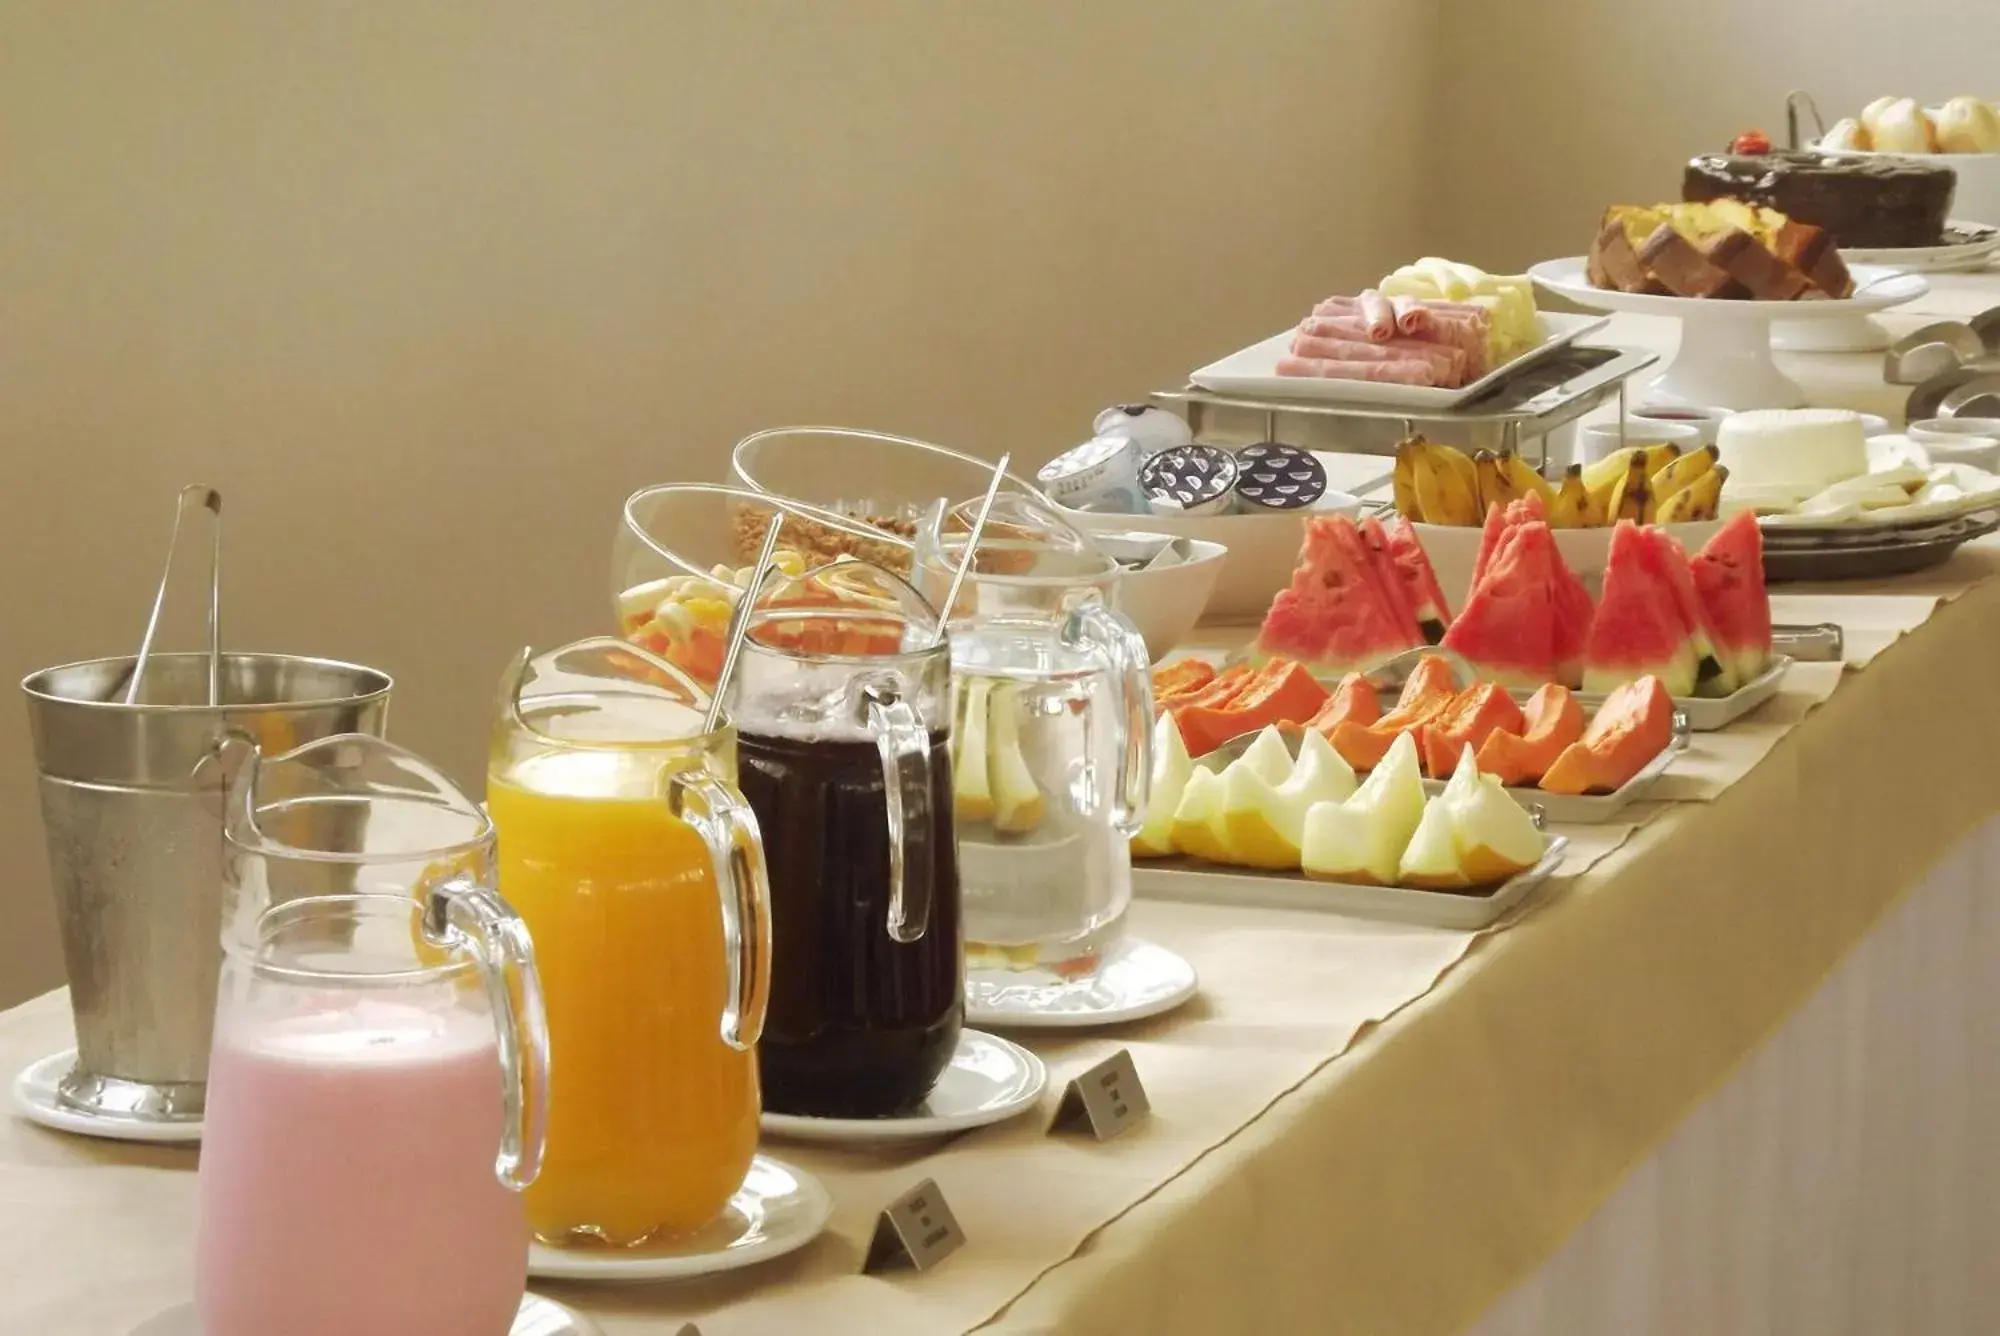 Food and drinks in Hotel Metropole